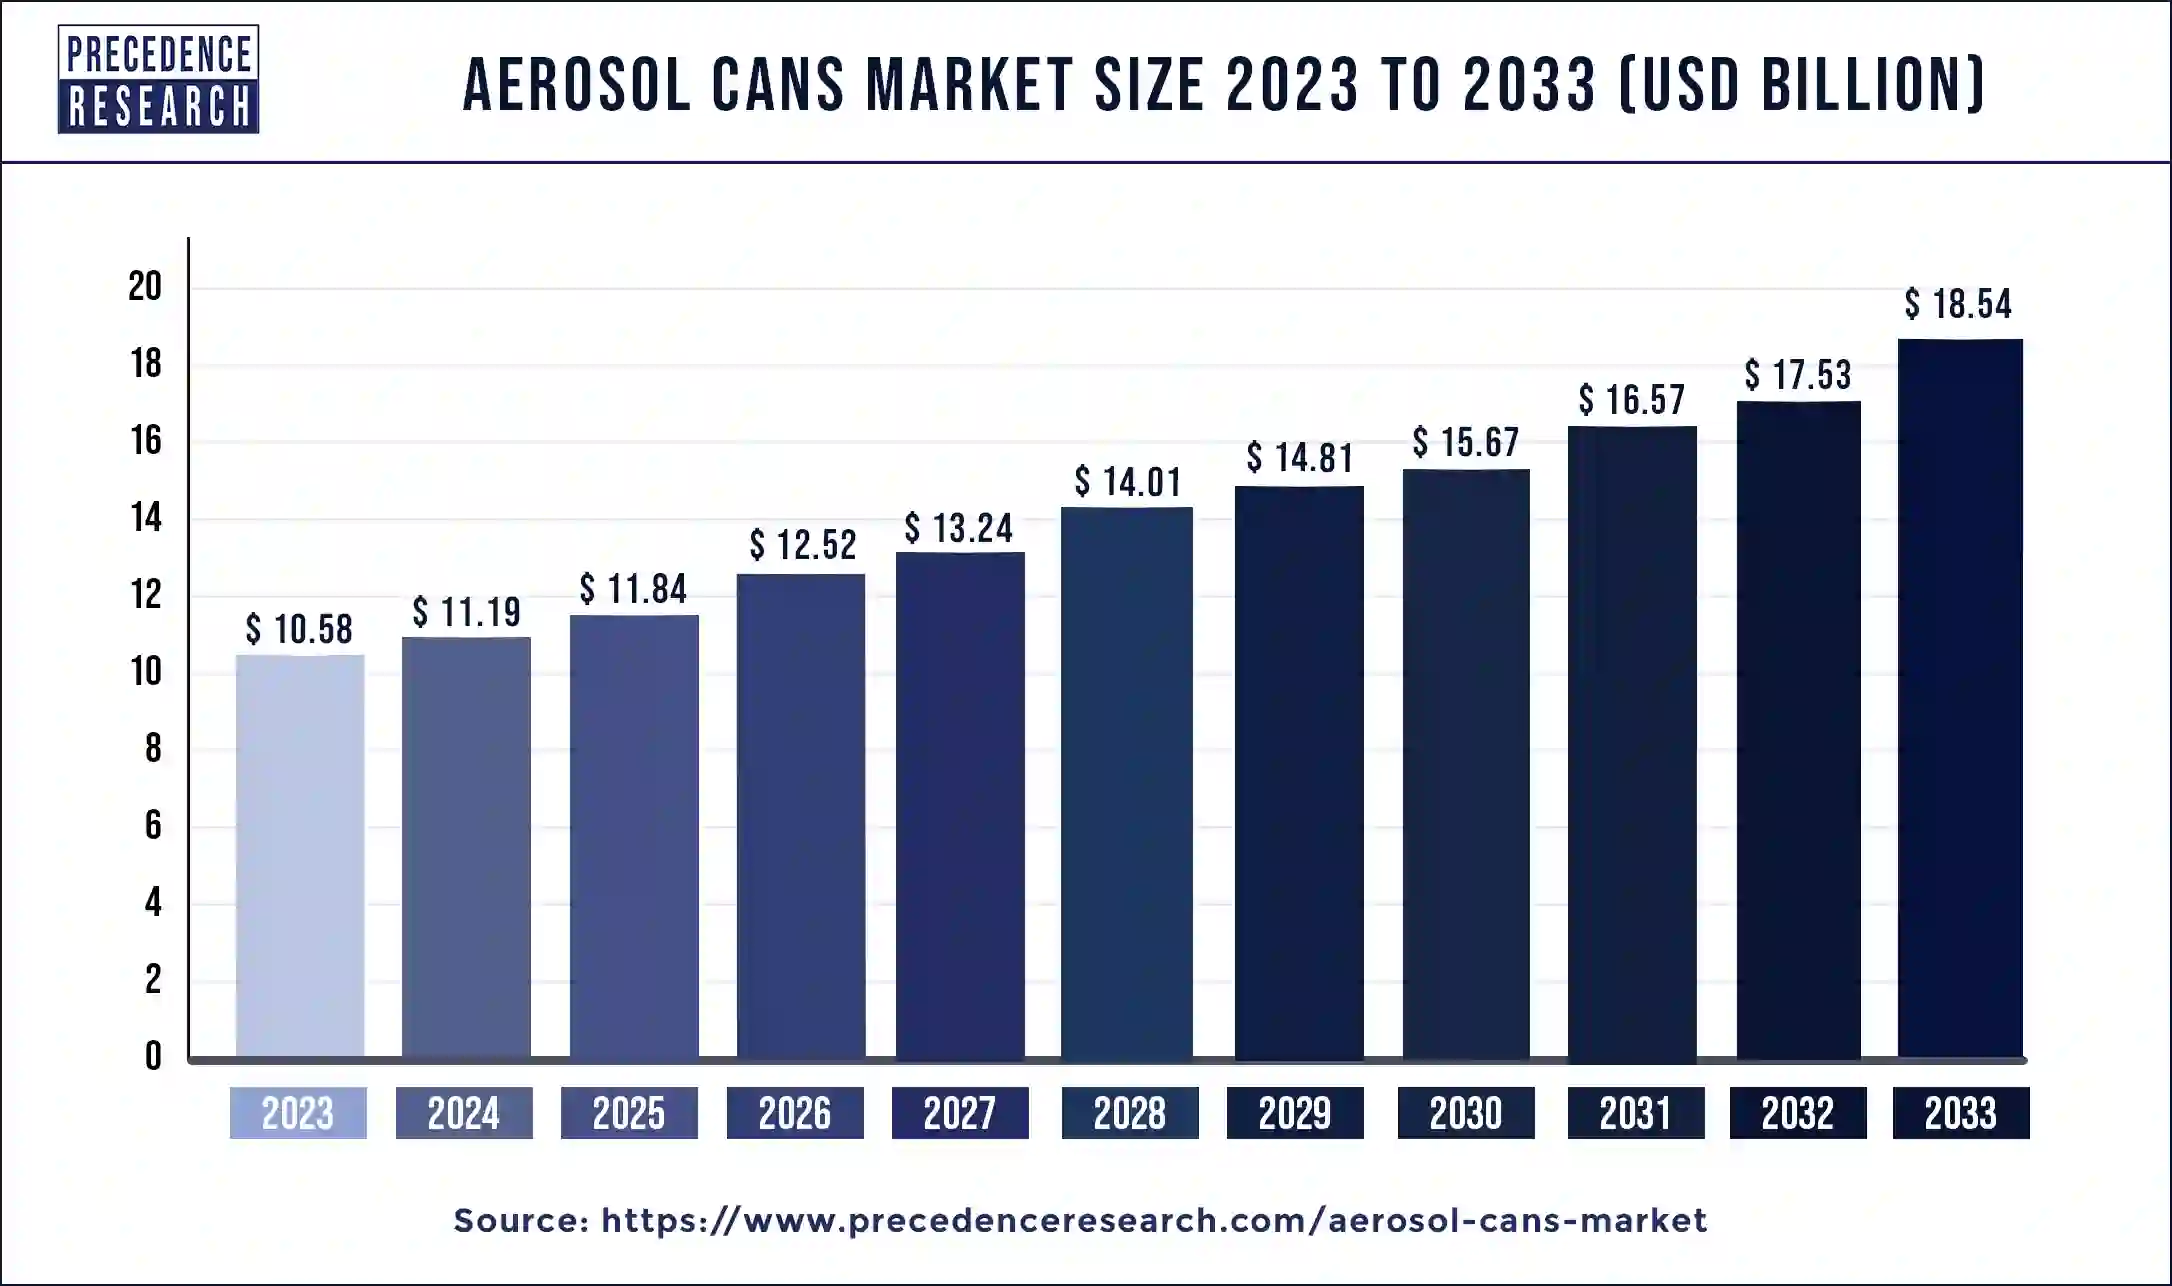 Aerosol Cans Market Size 2024 to 2033